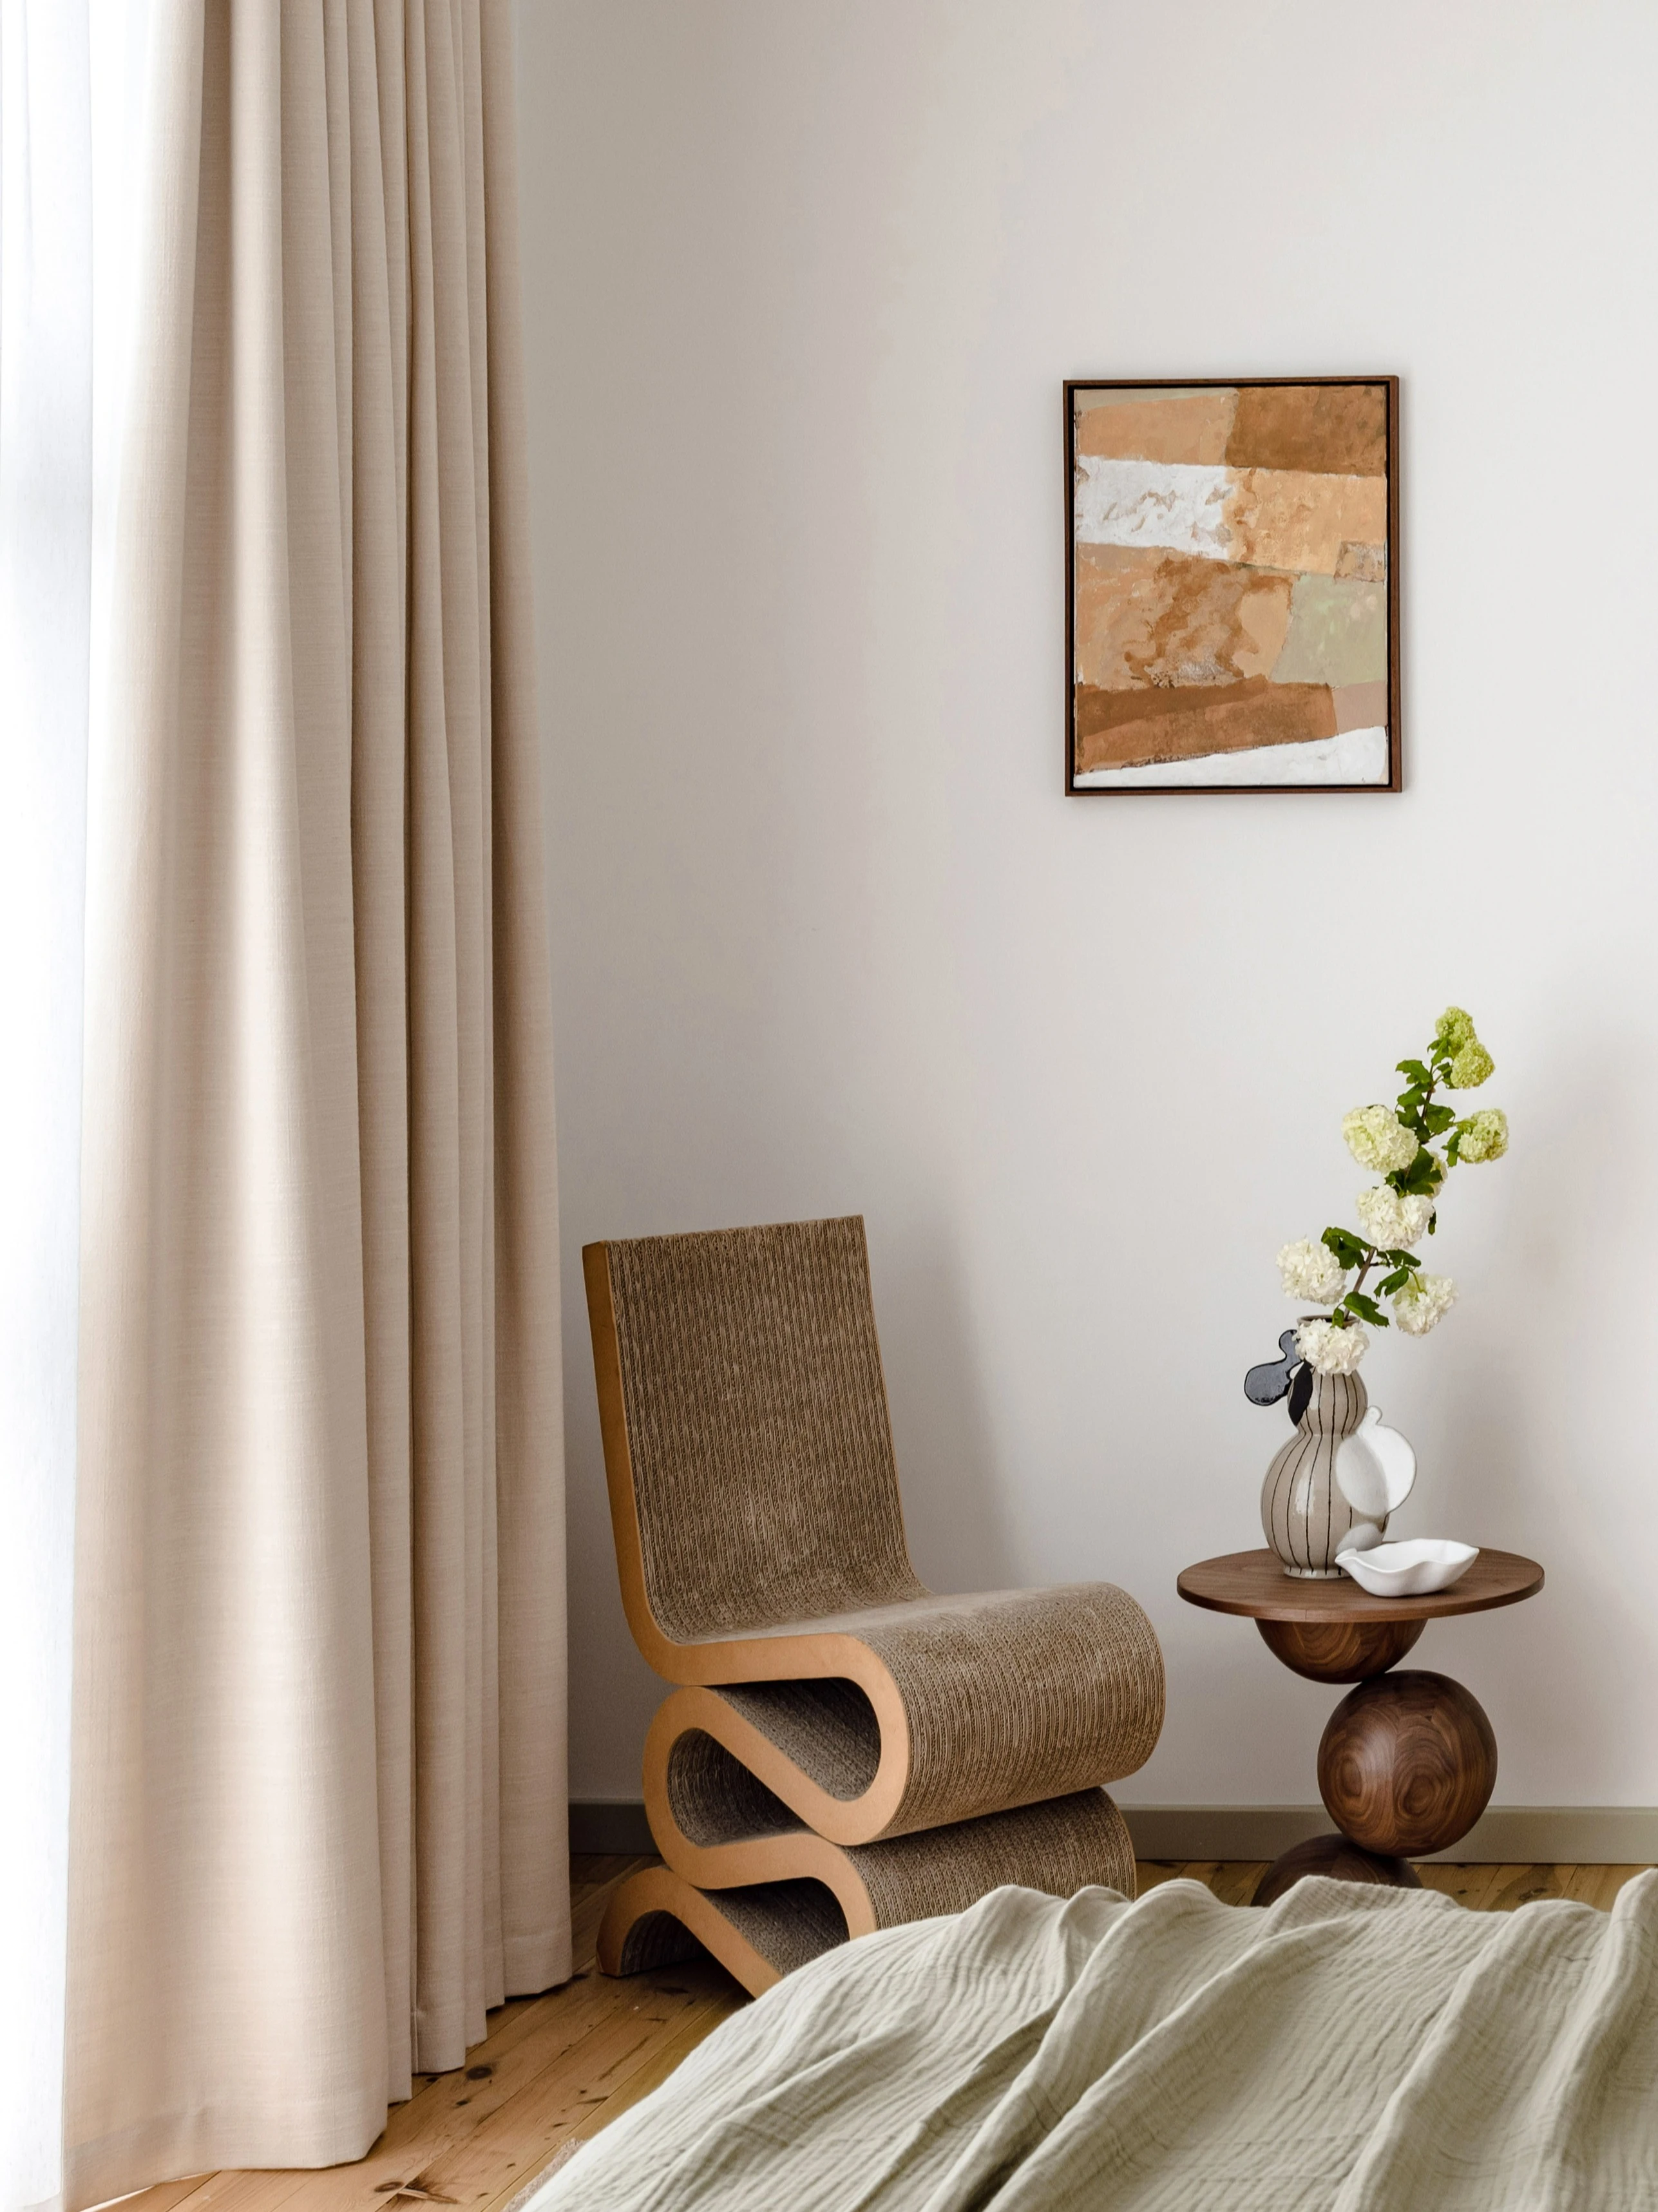 Neutral interior featuring wiggle chair and wooden sphere sculpture side table